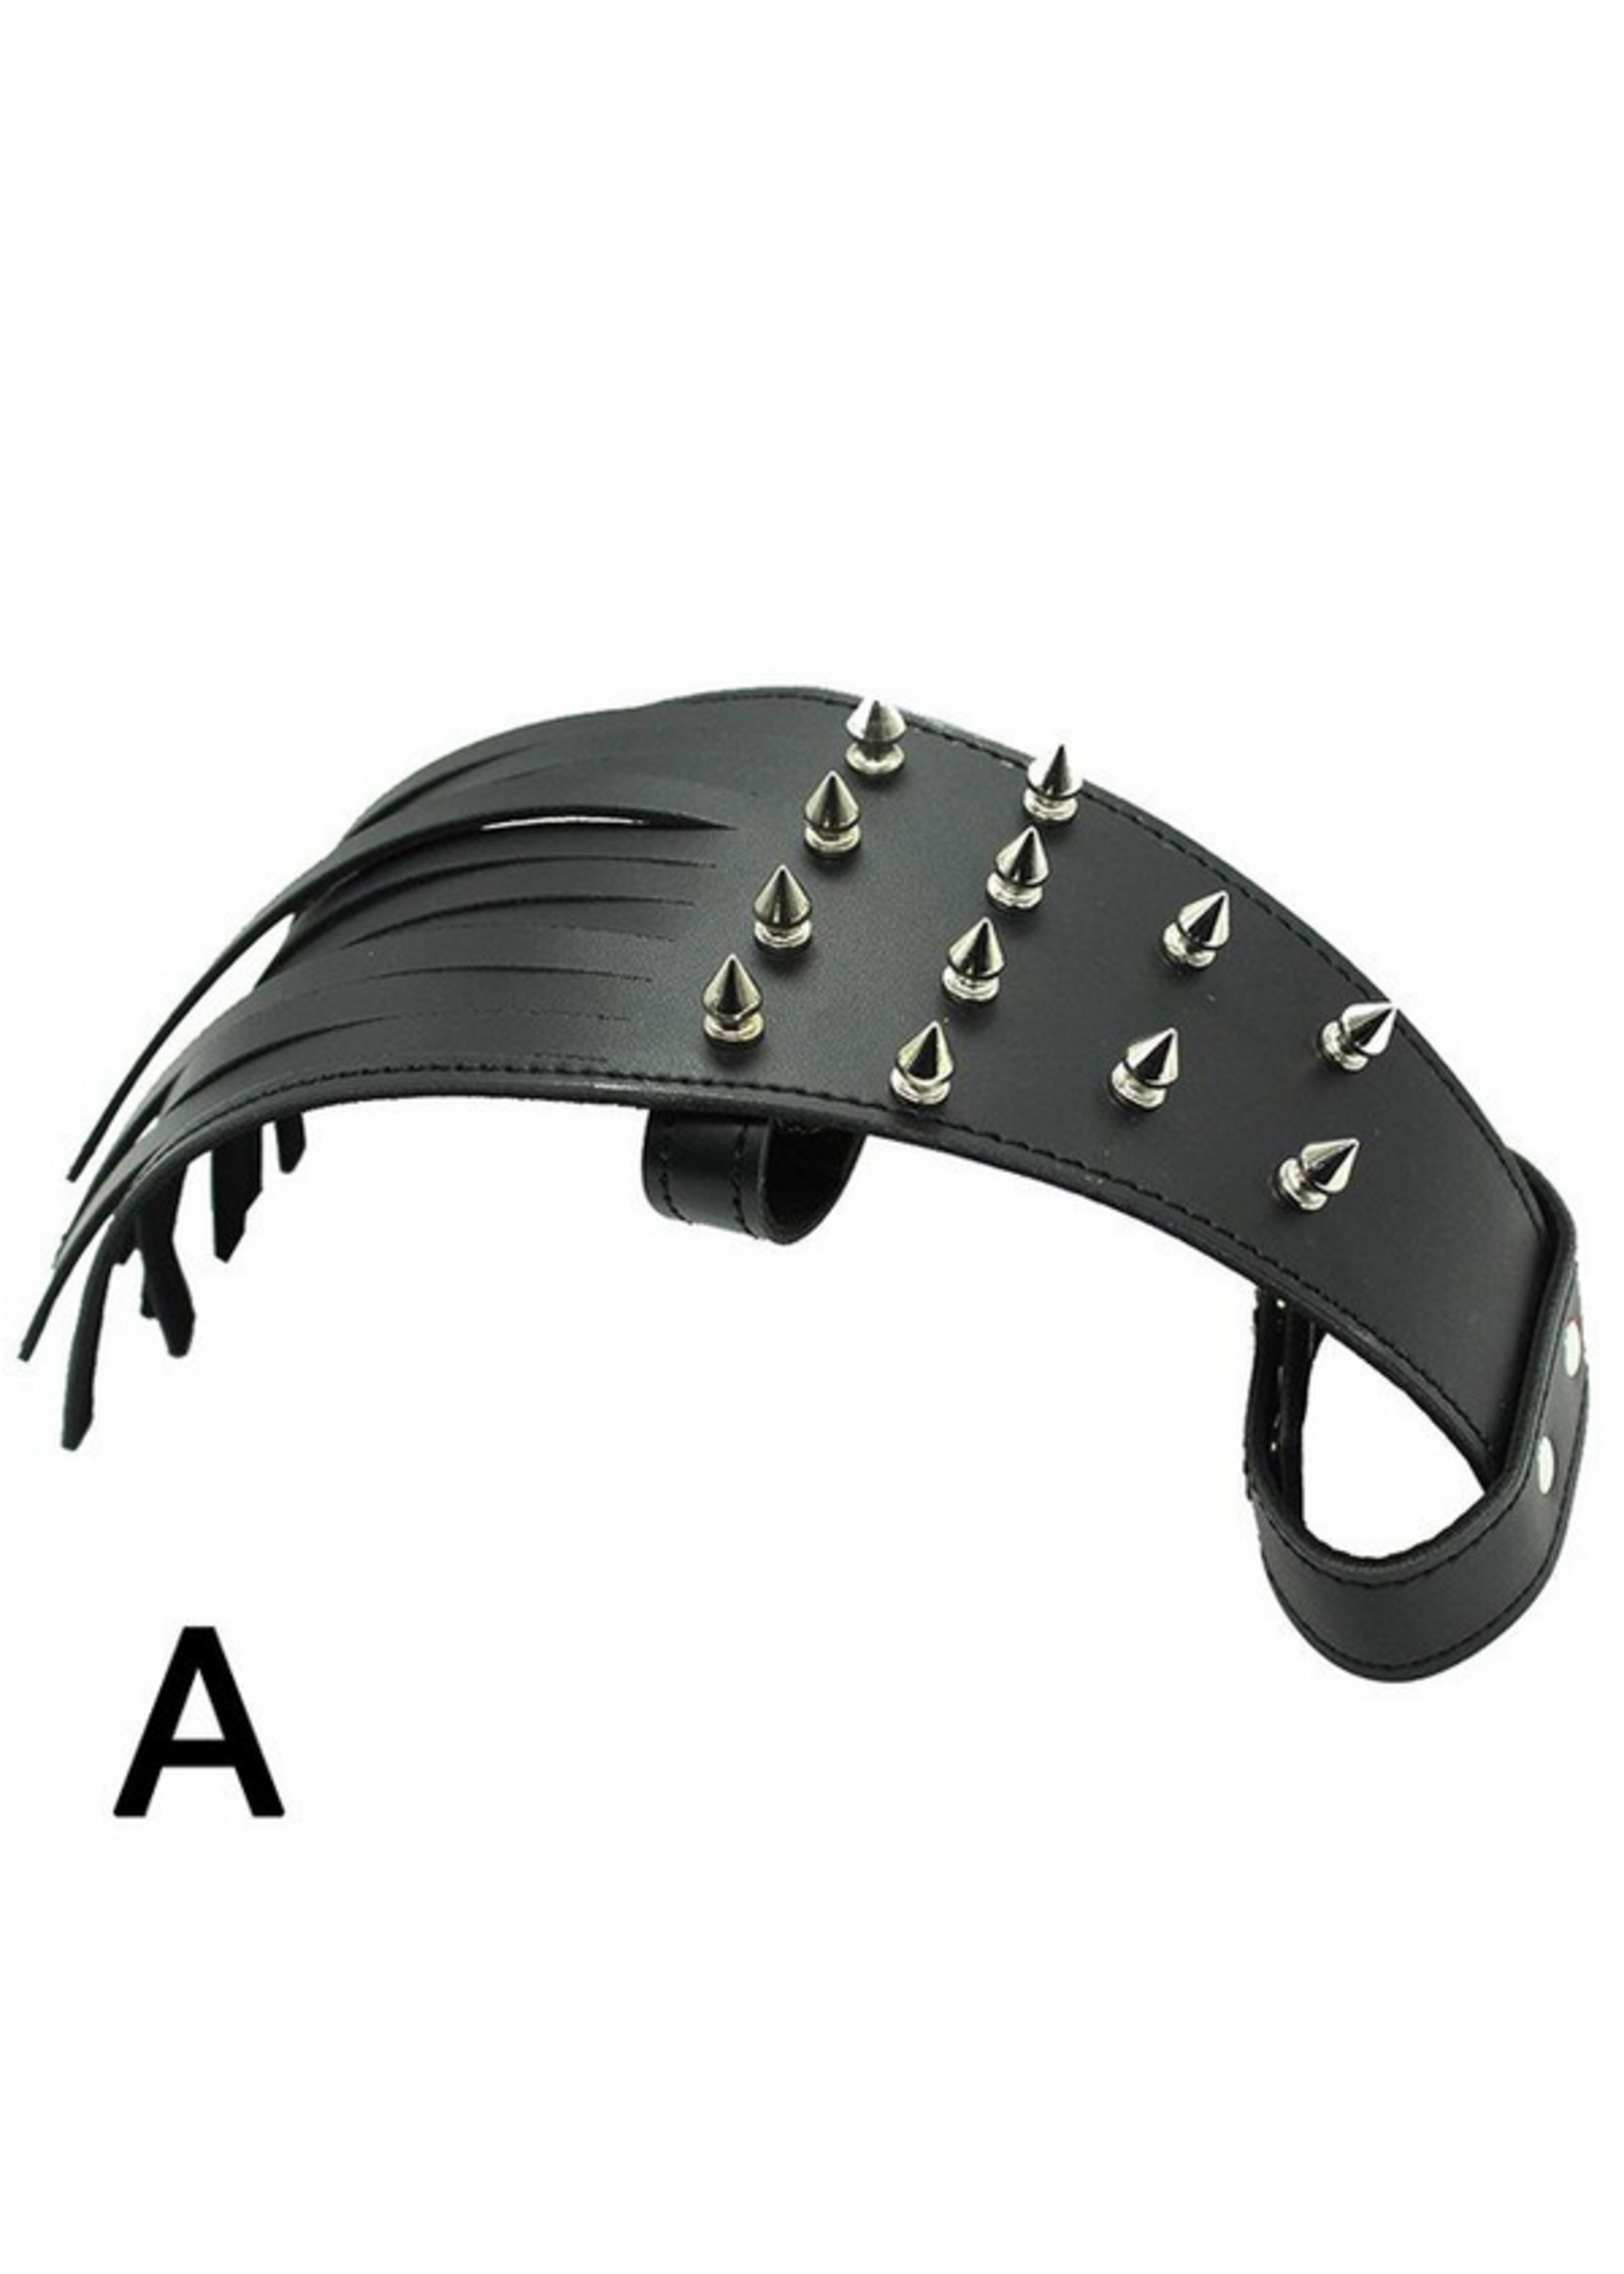 Spiked Glove with Flogger